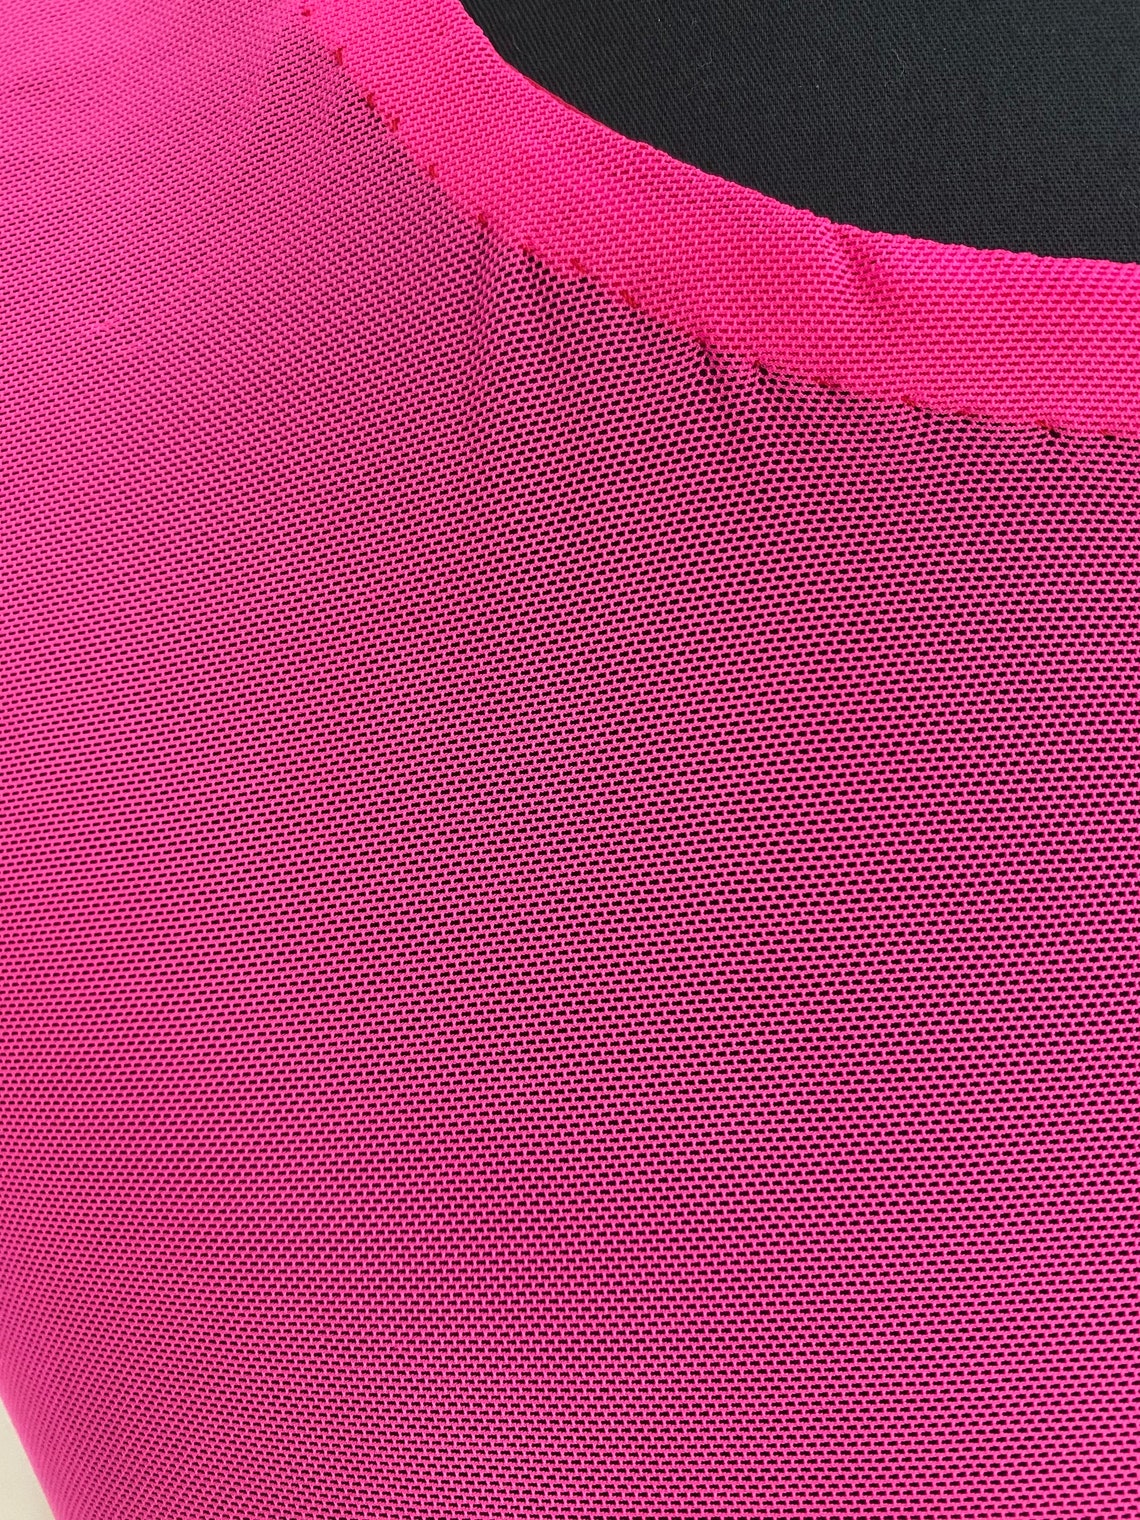 Hot pink stretchable mesh top without lining and sleeveless | Etsy